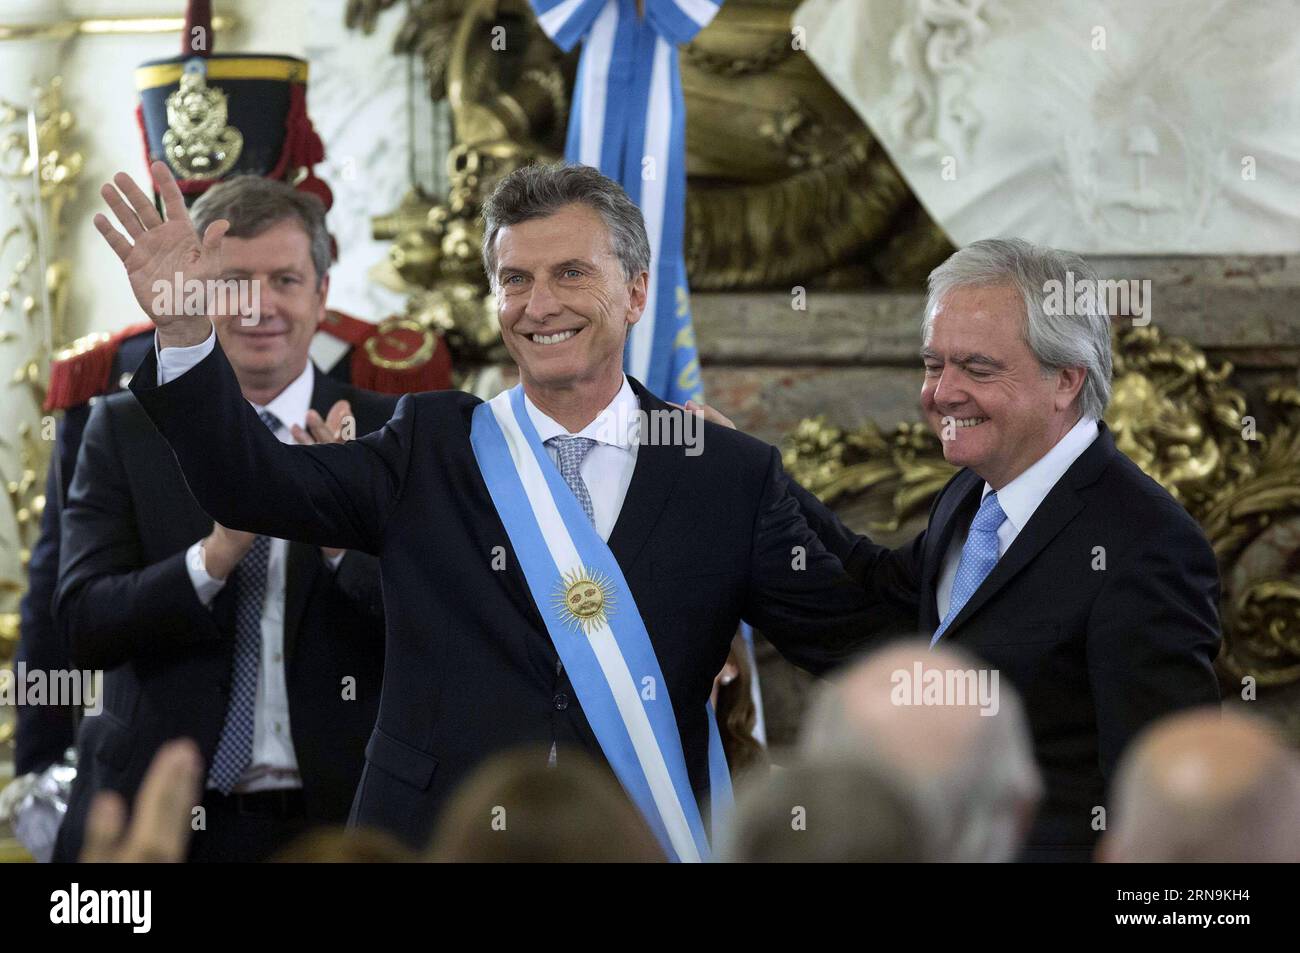 (151210) -- BUENOS AIRES, Dec. 10, 2015 -- Argentina s new President Mauricio Macri (C) waves after receiving the presidential sash from the provisional President of the Argentine Senate Federico Pinedo (R) at White Room of Casa Rosada (Pink House), in Buenos Aires city, capital of Argentina, on Dec. 10, 2015. Mauricio Macri on Thursday inaugurated as new Argentine President, succeeding Cristina Fernandez.Martin Zabala) (fnc) (ah) ARGENTINA-BUENOS AIRES-POLITICS-INAUGURATION e MARTINxZABALA PUBLICATIONxNOTxINxCHN   151210 Buenos Aires DEC 10 2015 Argentina S New President Mauricio Macri C Wave Stock Photo